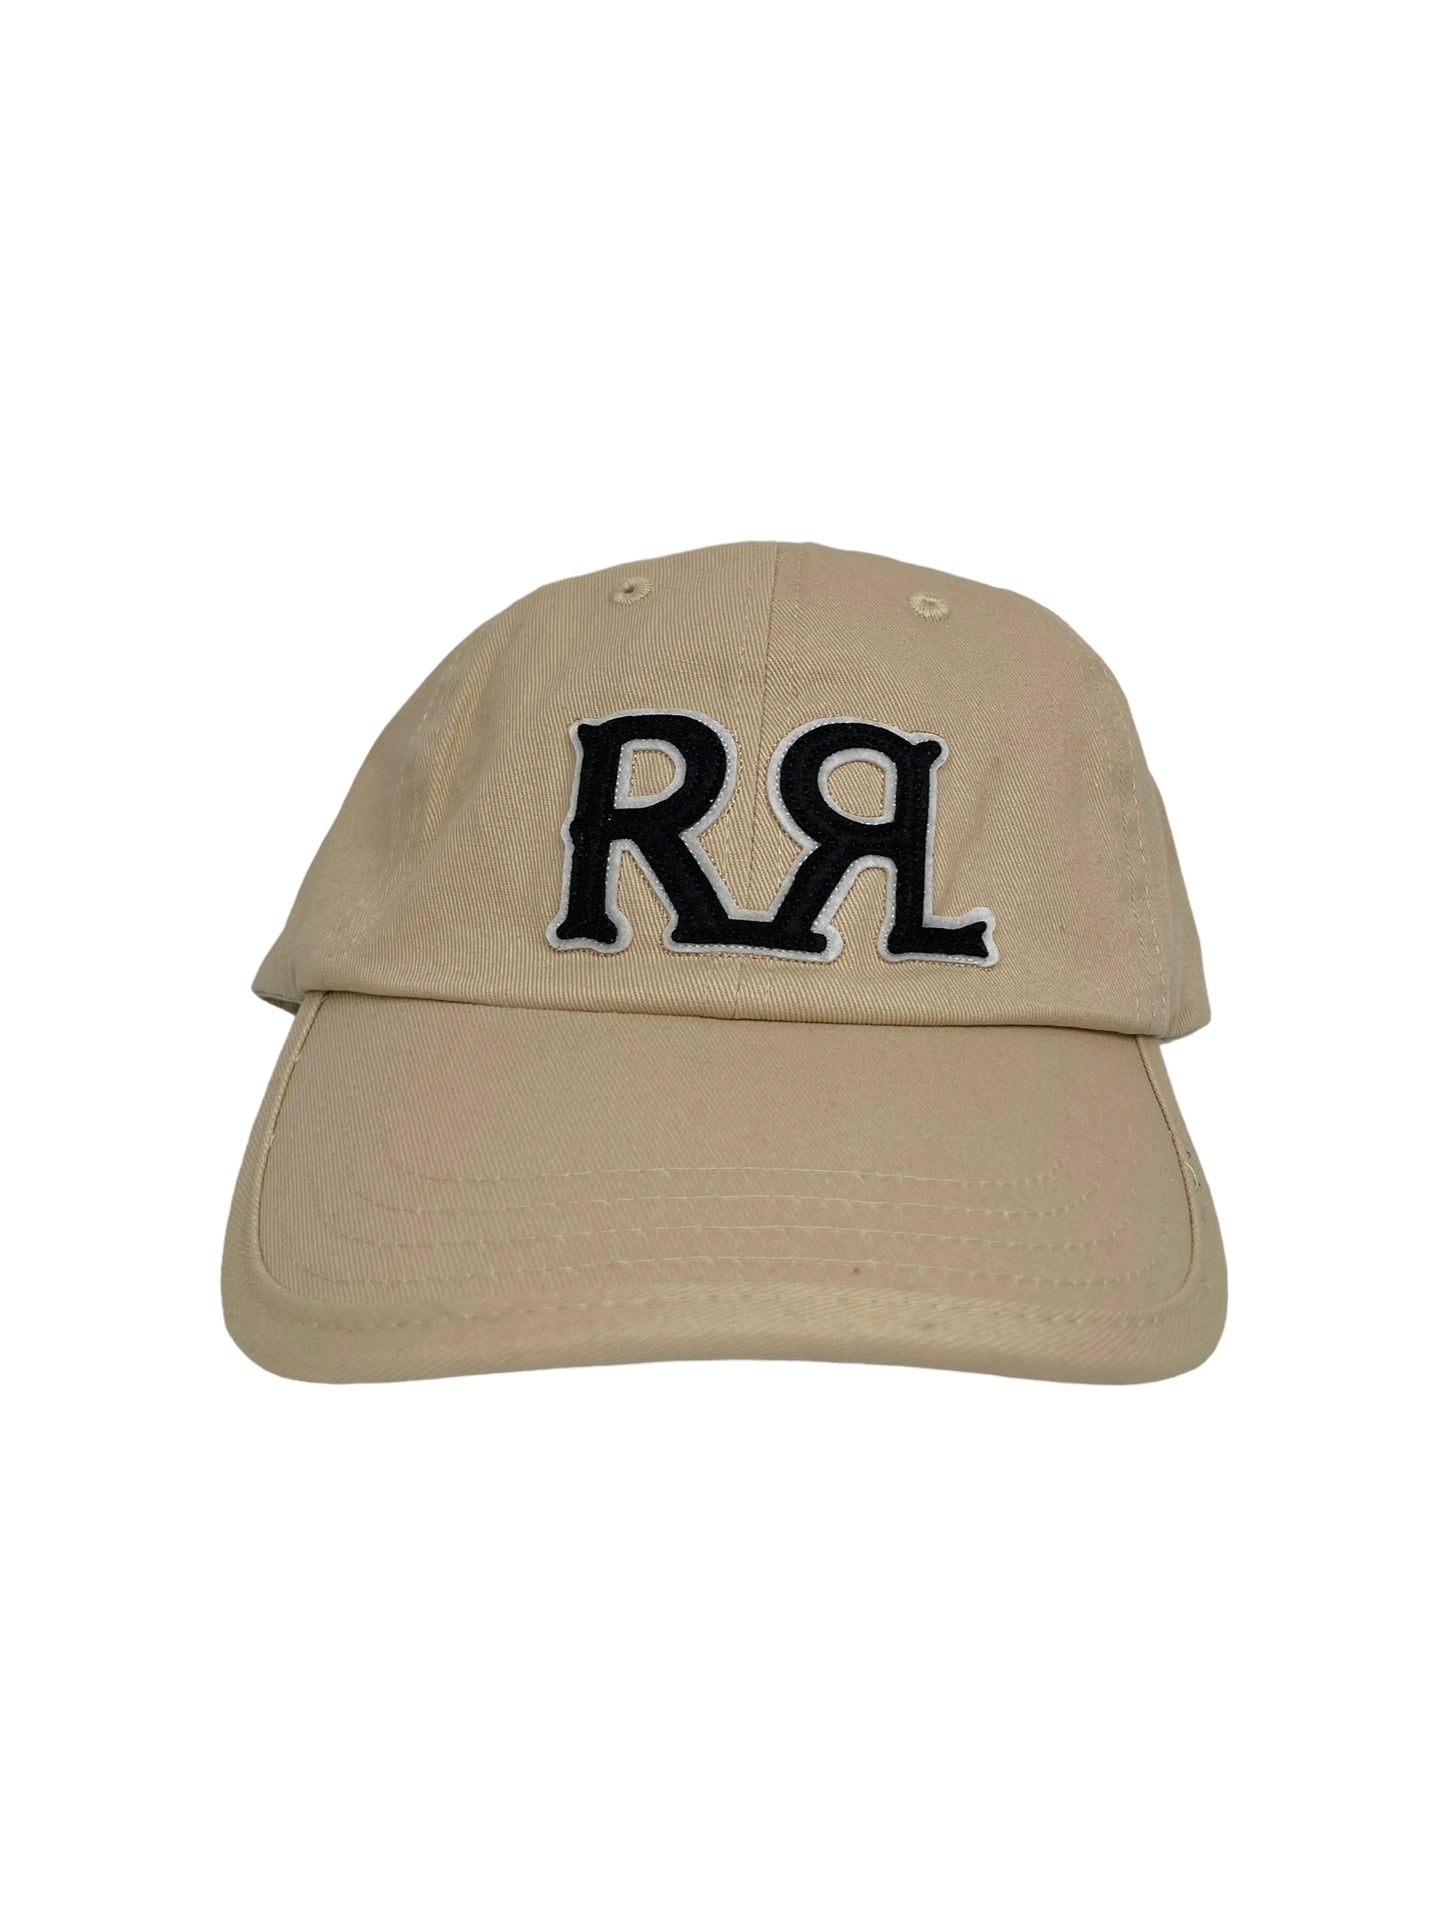 Double RL Tan Baseball Cap — Genuine Design luxury consignment Calgary, Alberta, Canada New and pre-owned clothing, shoes, accessories.